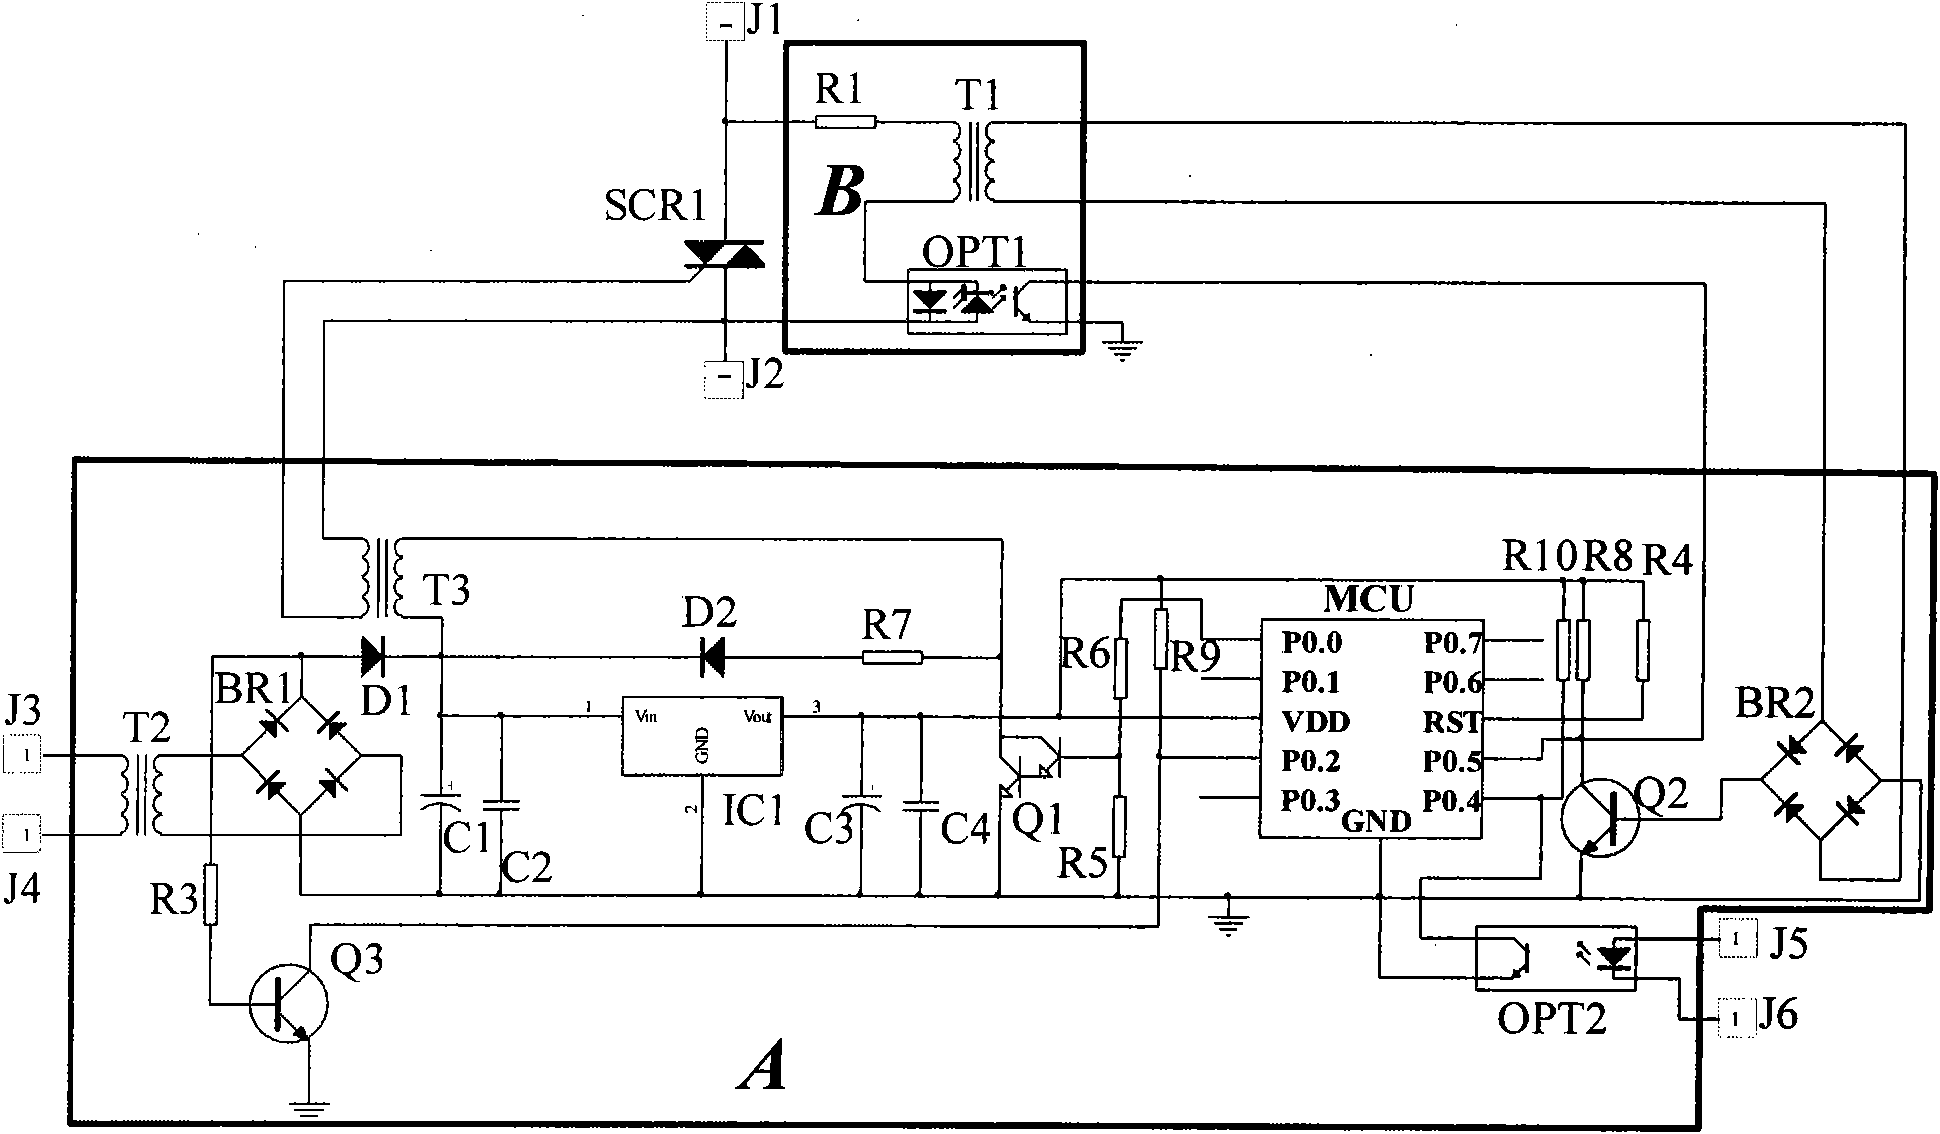 Capacitor switching device